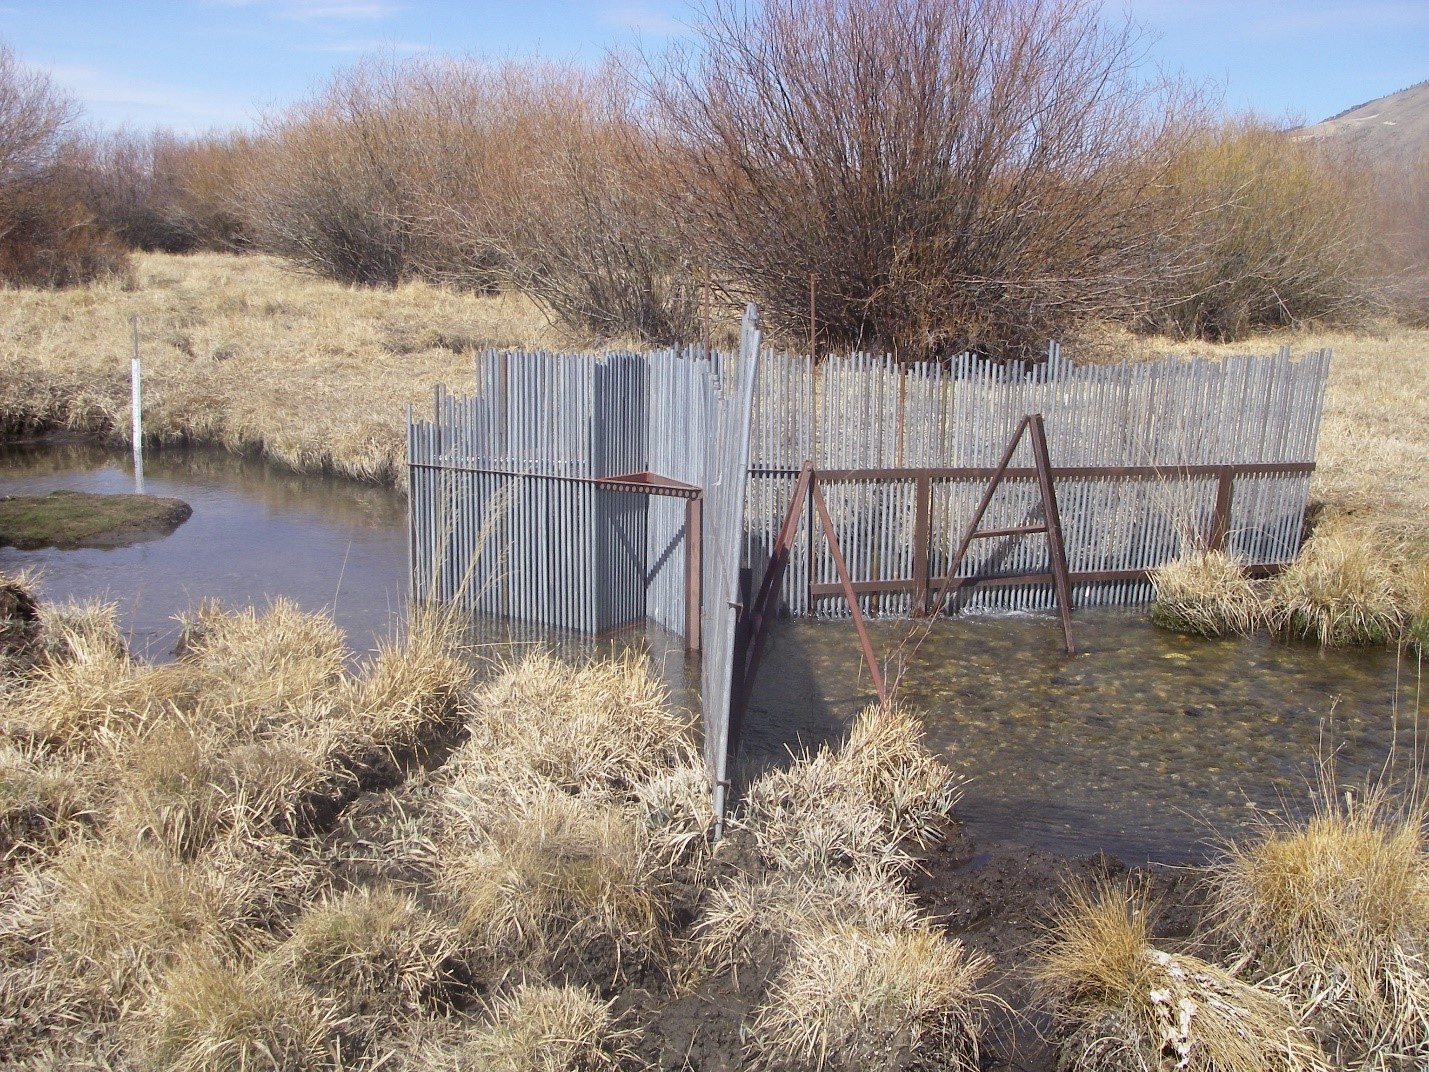 Fences in streams are picket weirs that help biologists survey salmon and trout migrations Idaho Fish and Game